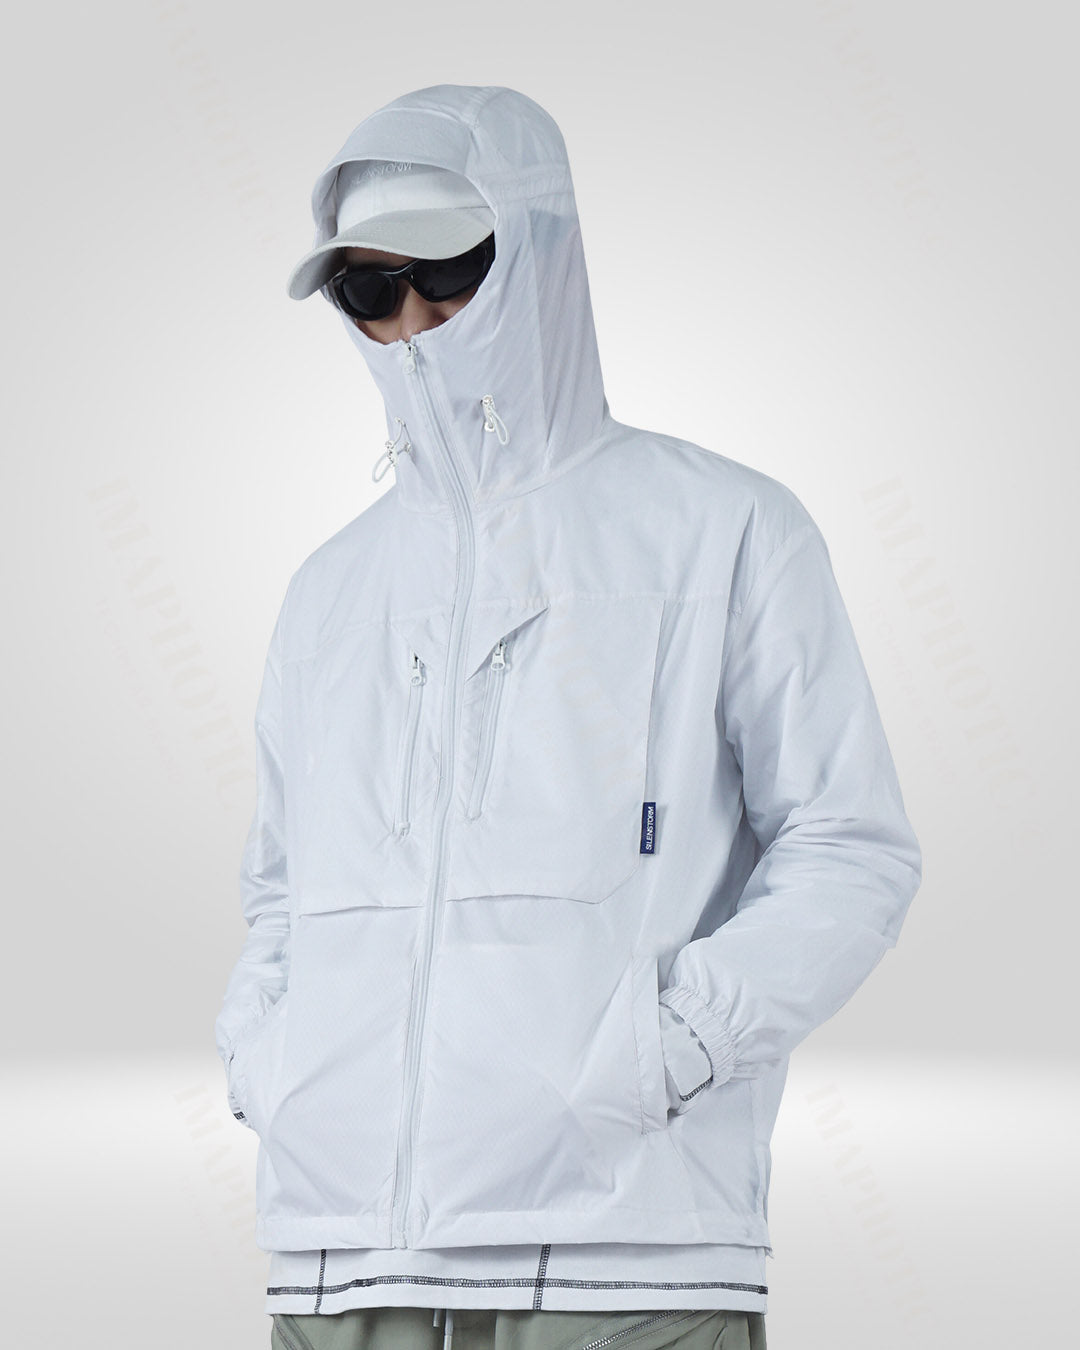 White Sun Protective Jacket - Lightweight UV Protection Outdoor